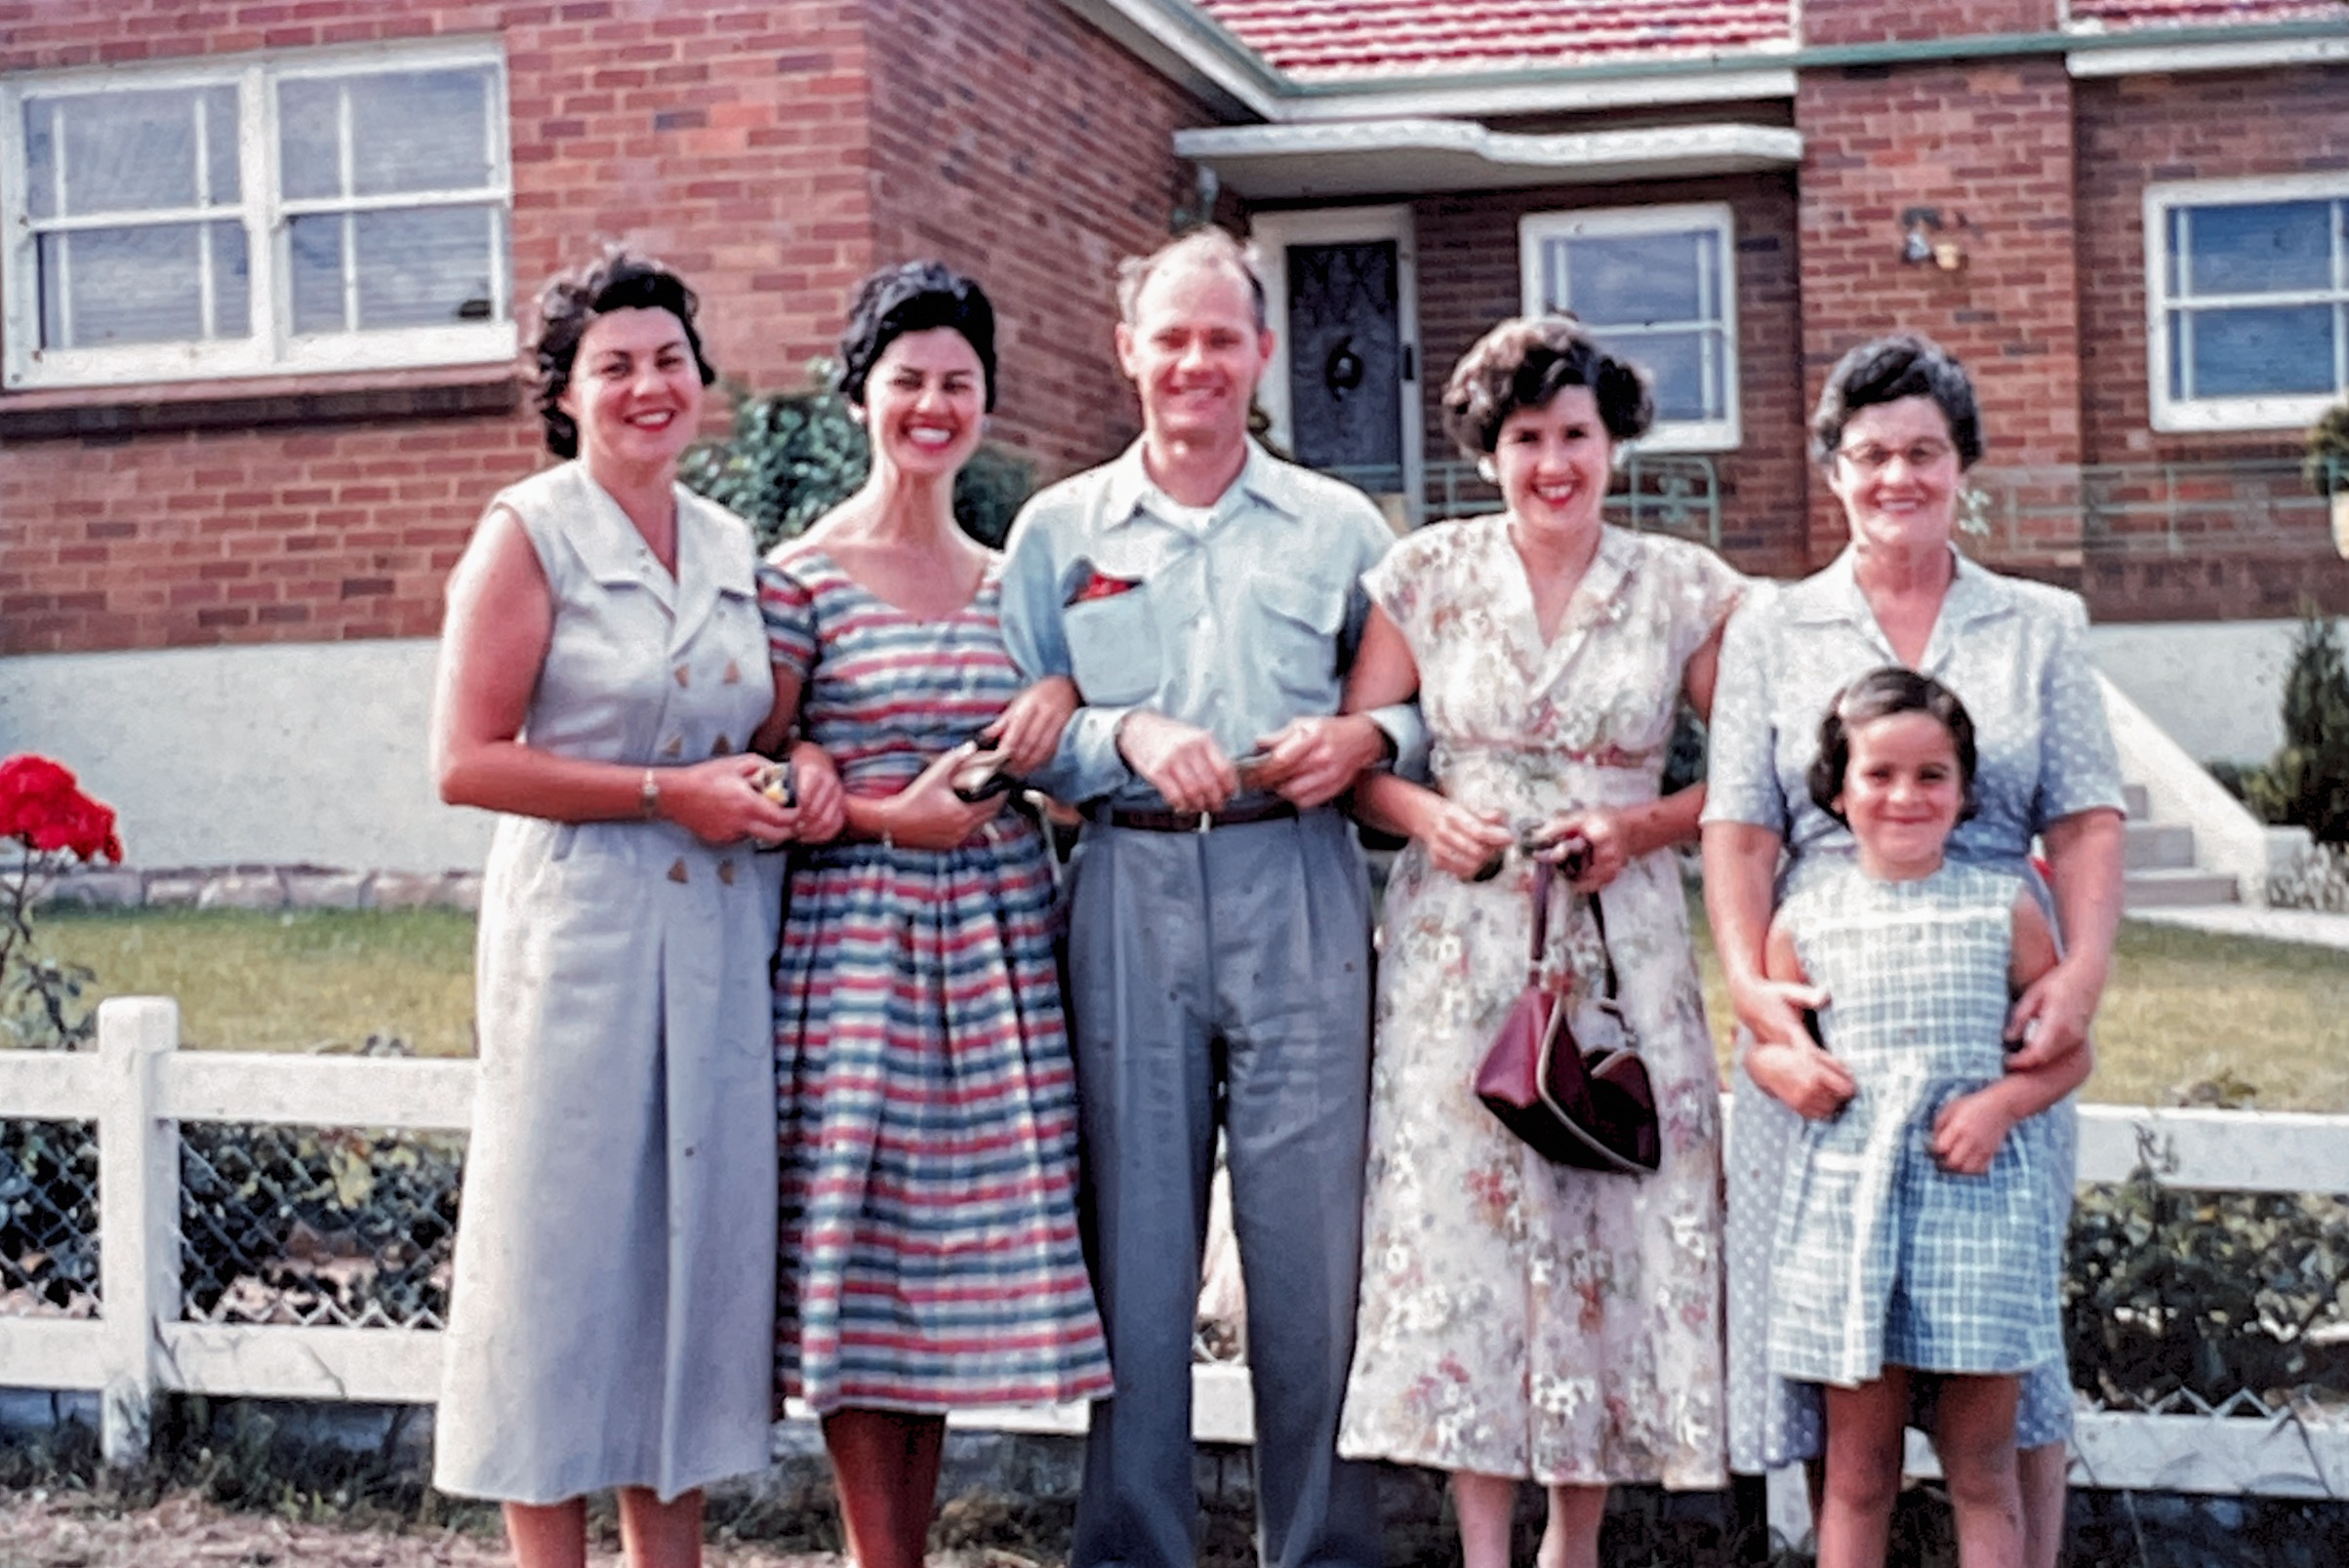 Family in the 1950’s Sydney